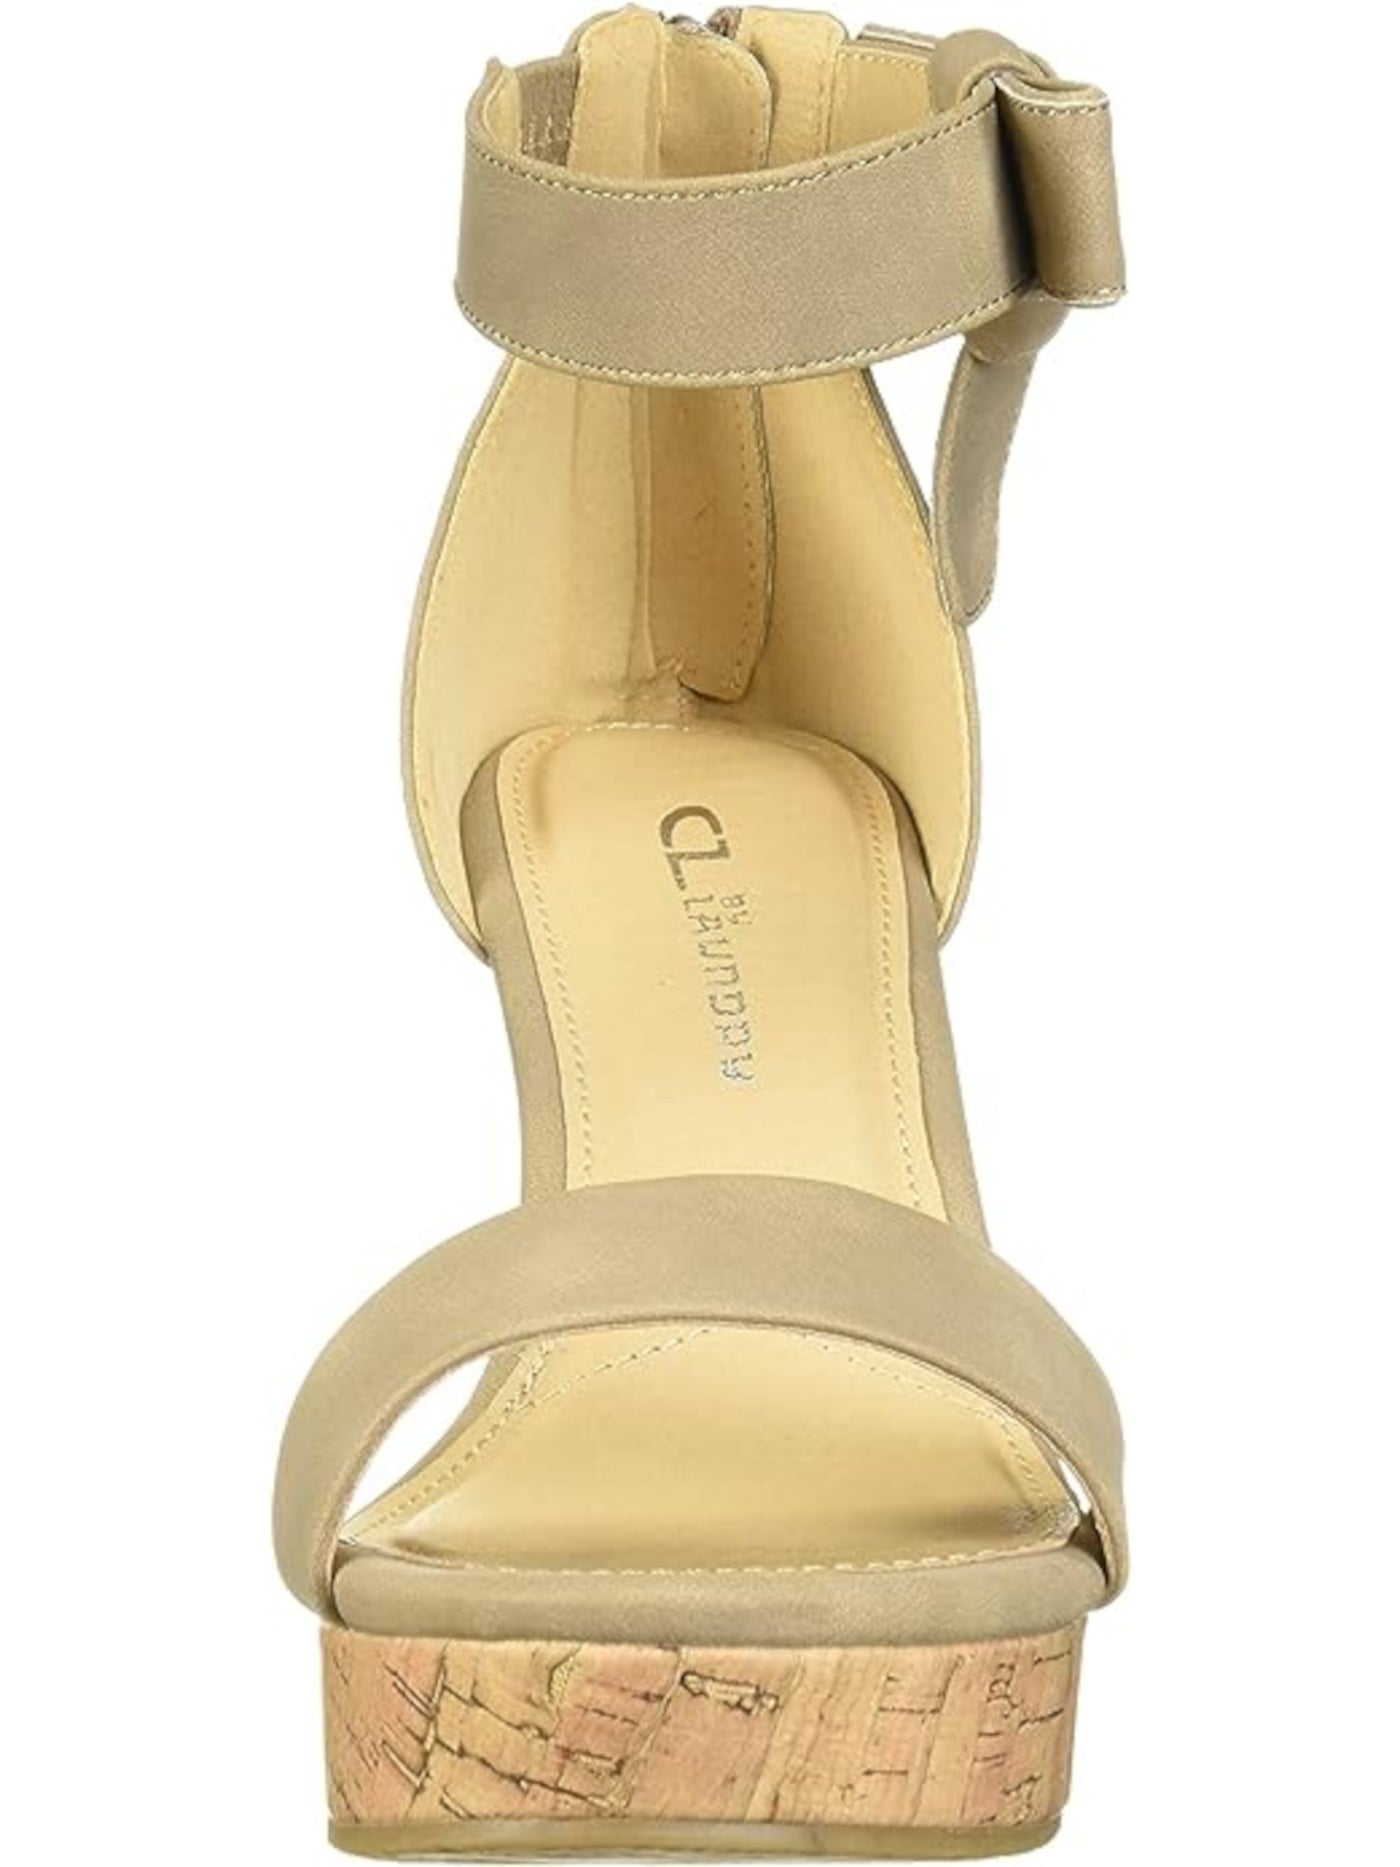 CHINESE LAUNDRY Womens Beige Ankle Strap Padded Blisse Round Toe Wedge Zip-Up Heeled Sandal 7